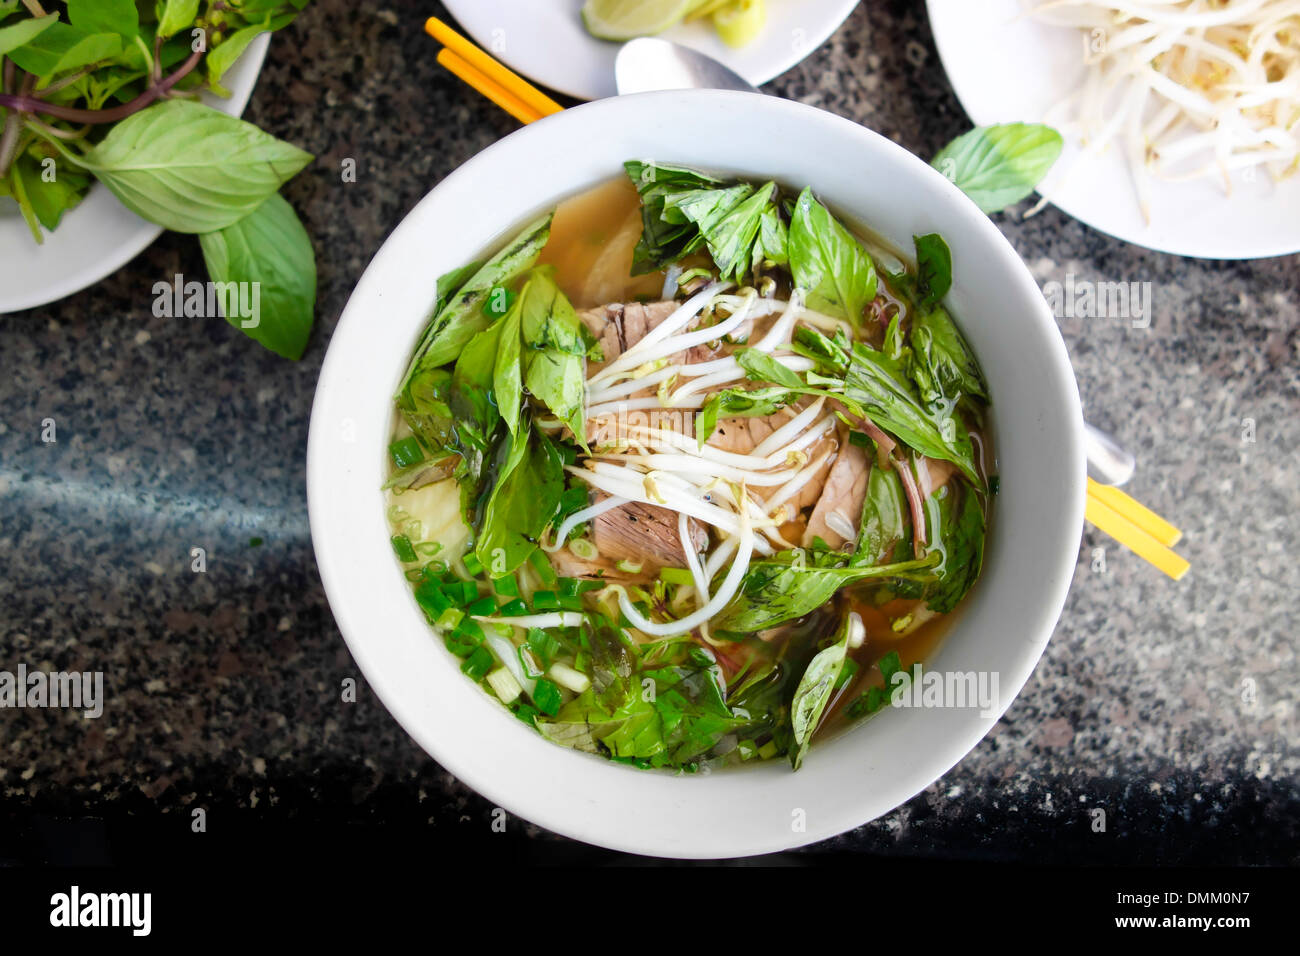 Vietnamese Spicy Sliced Beef and noodle Pho Bo Soup Stock Photo